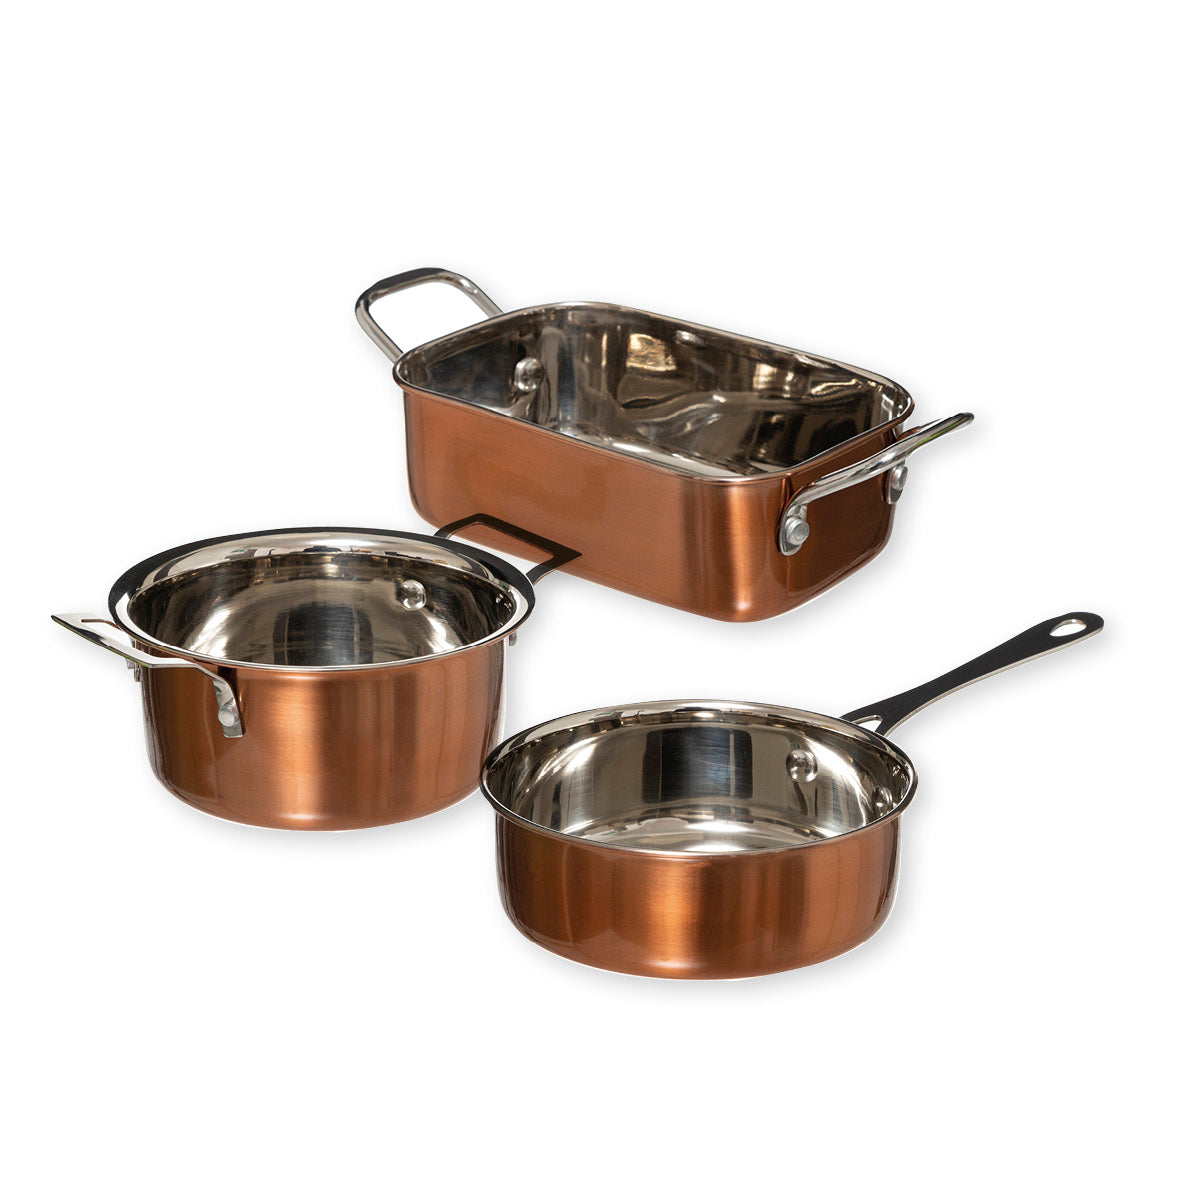 Mini ovendish + Sauce pan + Casserole (For serving only) - Copper / Silver